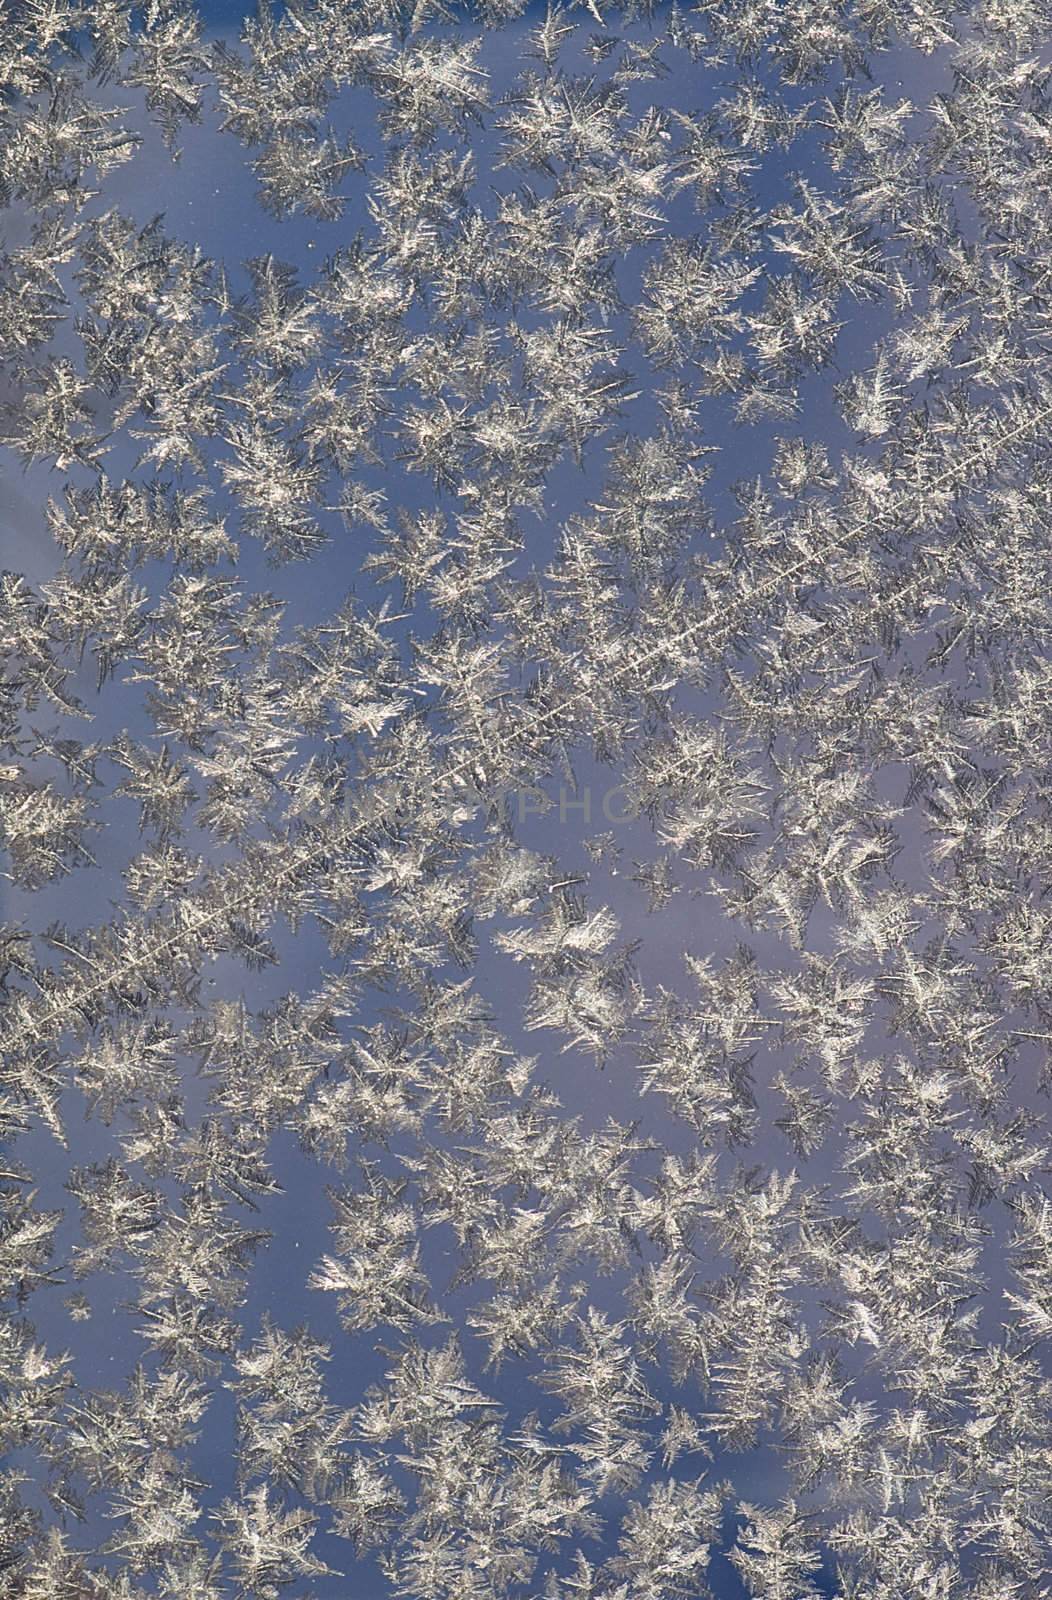 Frost Iceflower  on a glass window